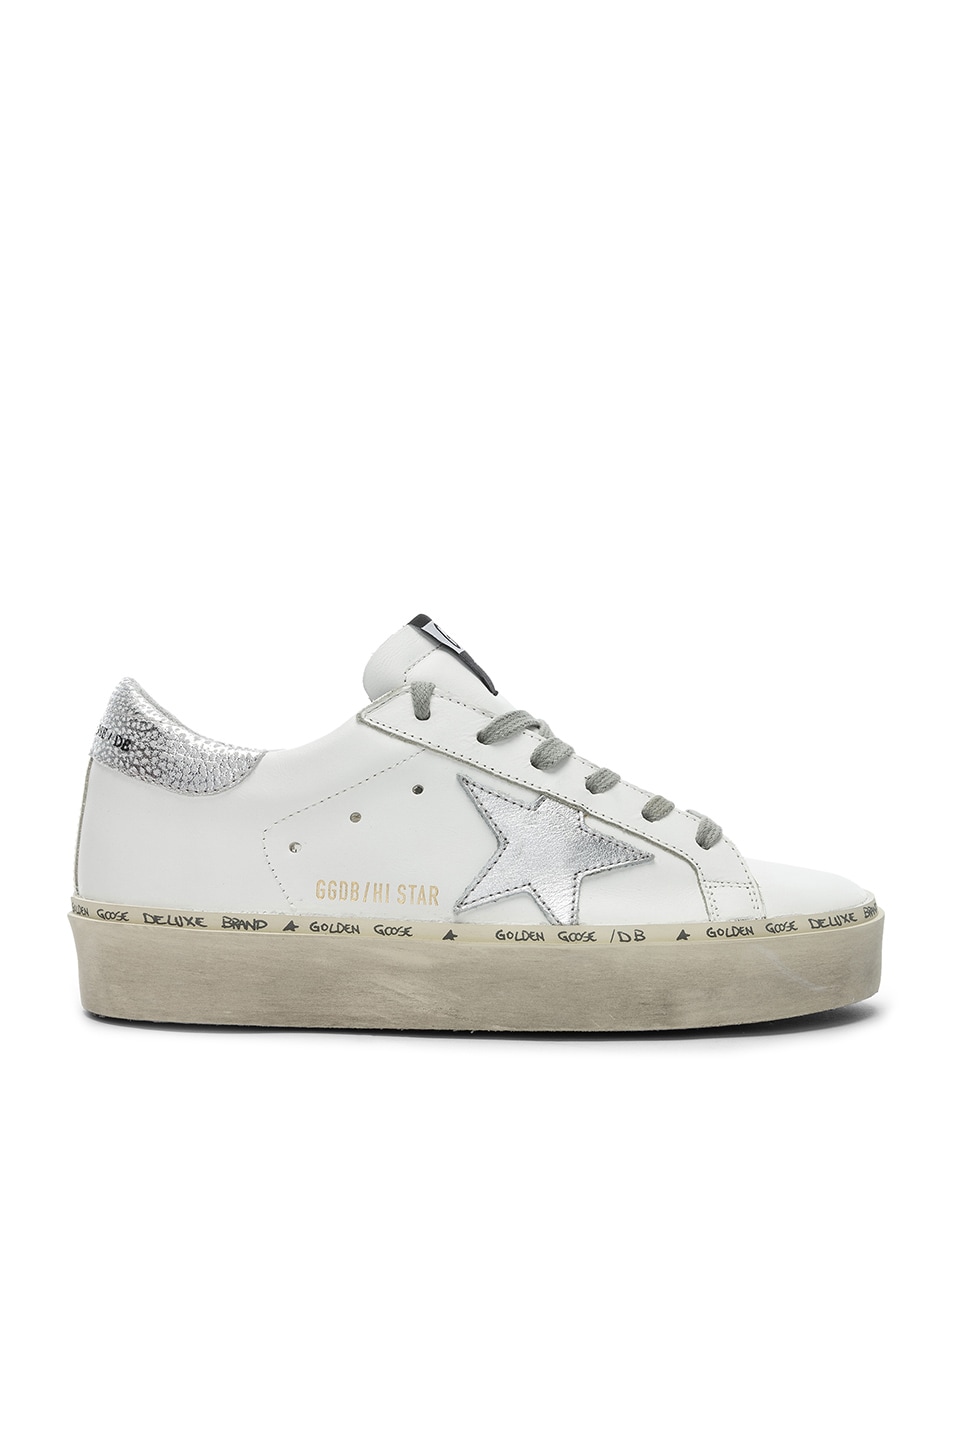 Image 1 of Golden Goose Hi Star Sneakers in White Leather & Shiny Star